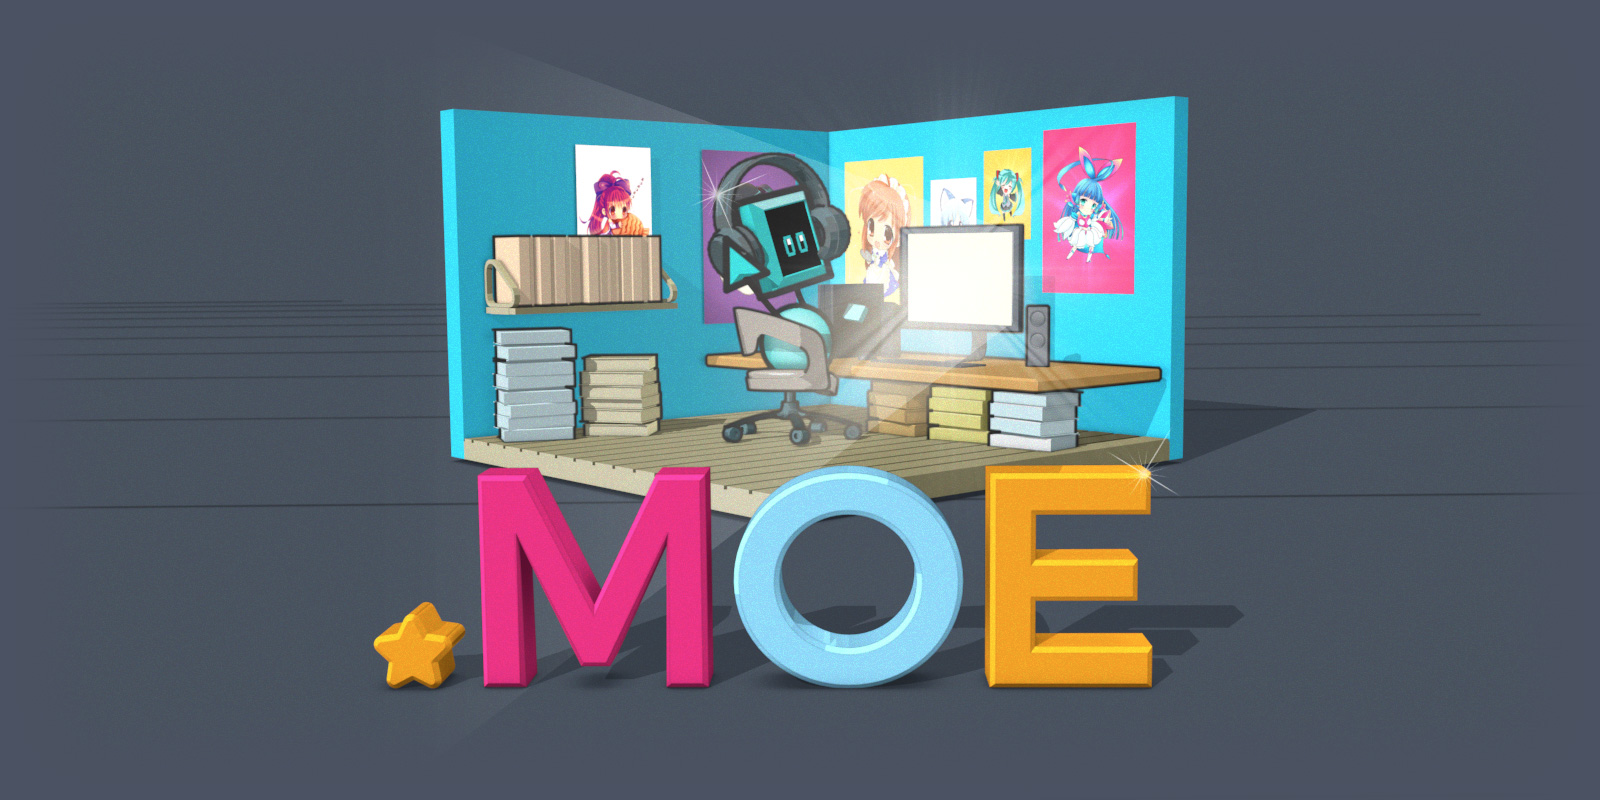 Find your .moe in February